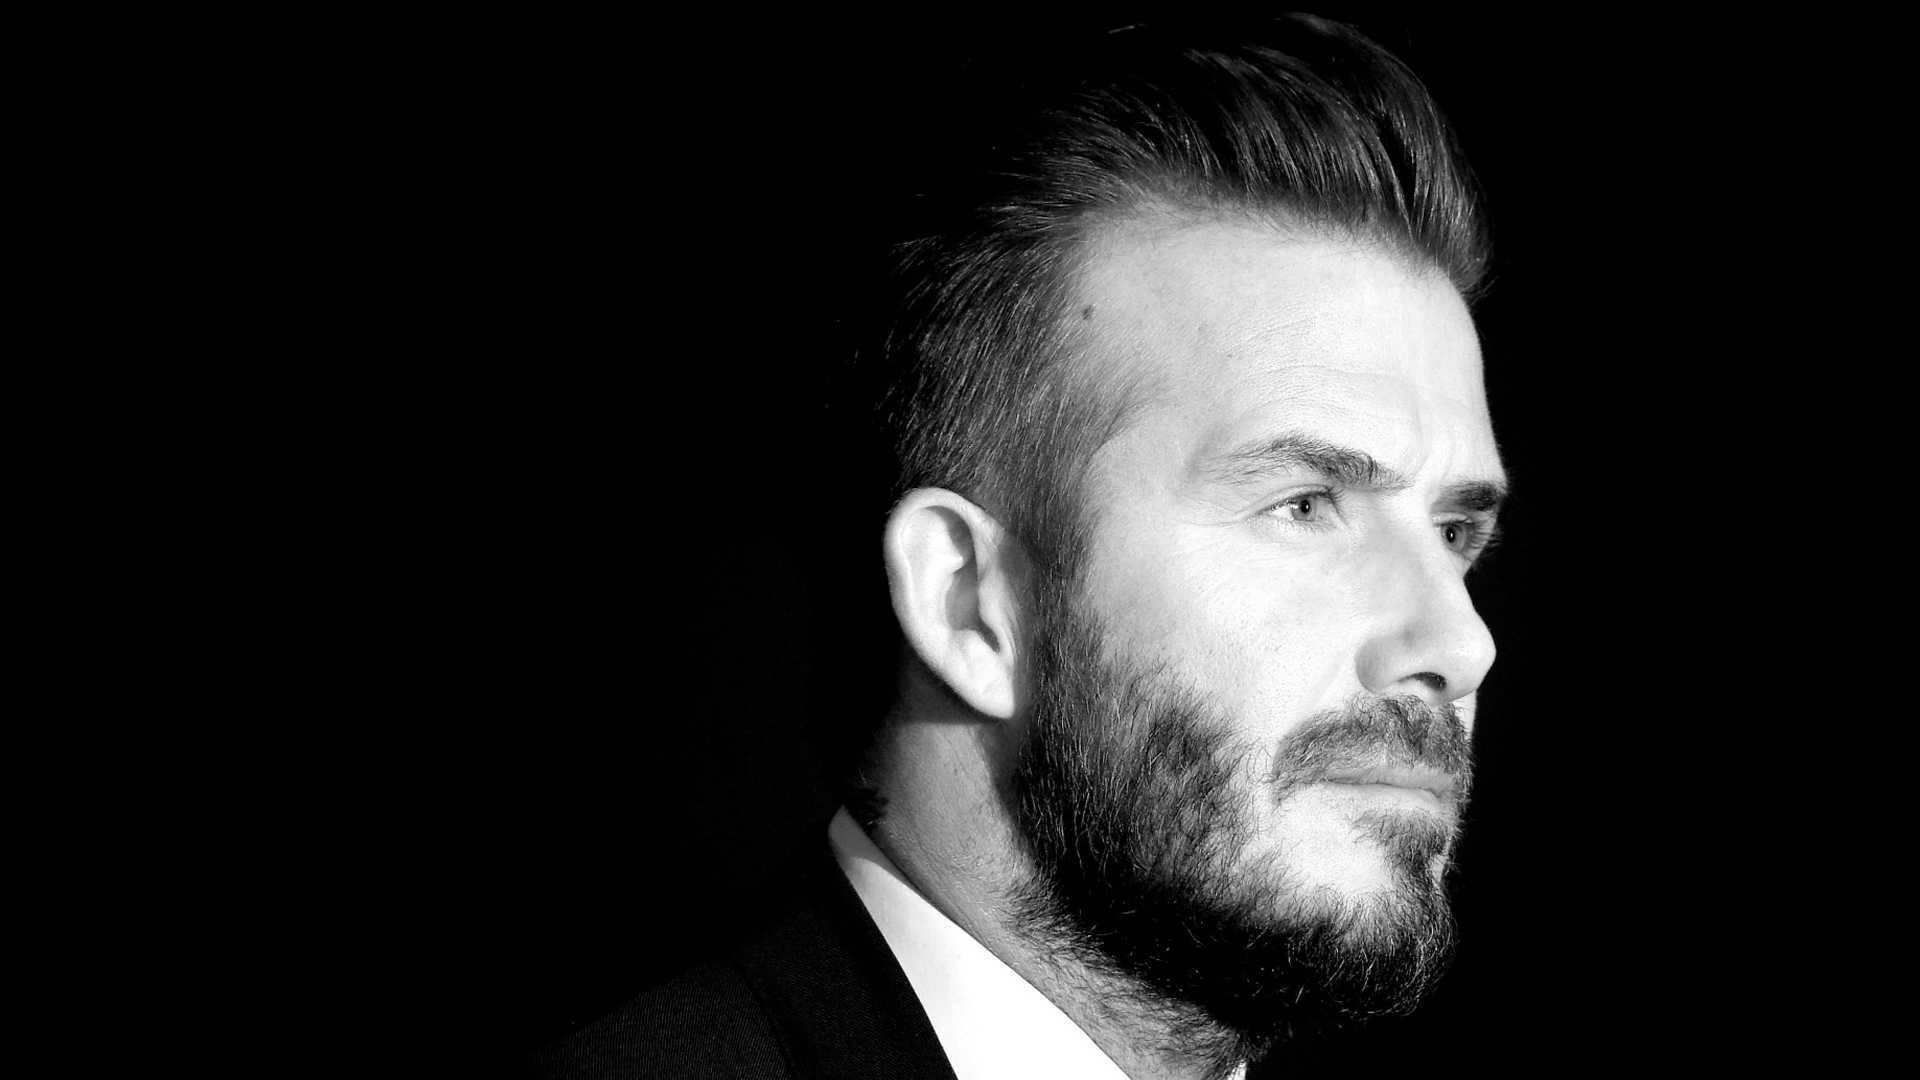 David Beckham: Monochrome, Scored his first goal for the LA Galaxy on 15 August 2007. 1920x1080 Full HD Wallpaper.